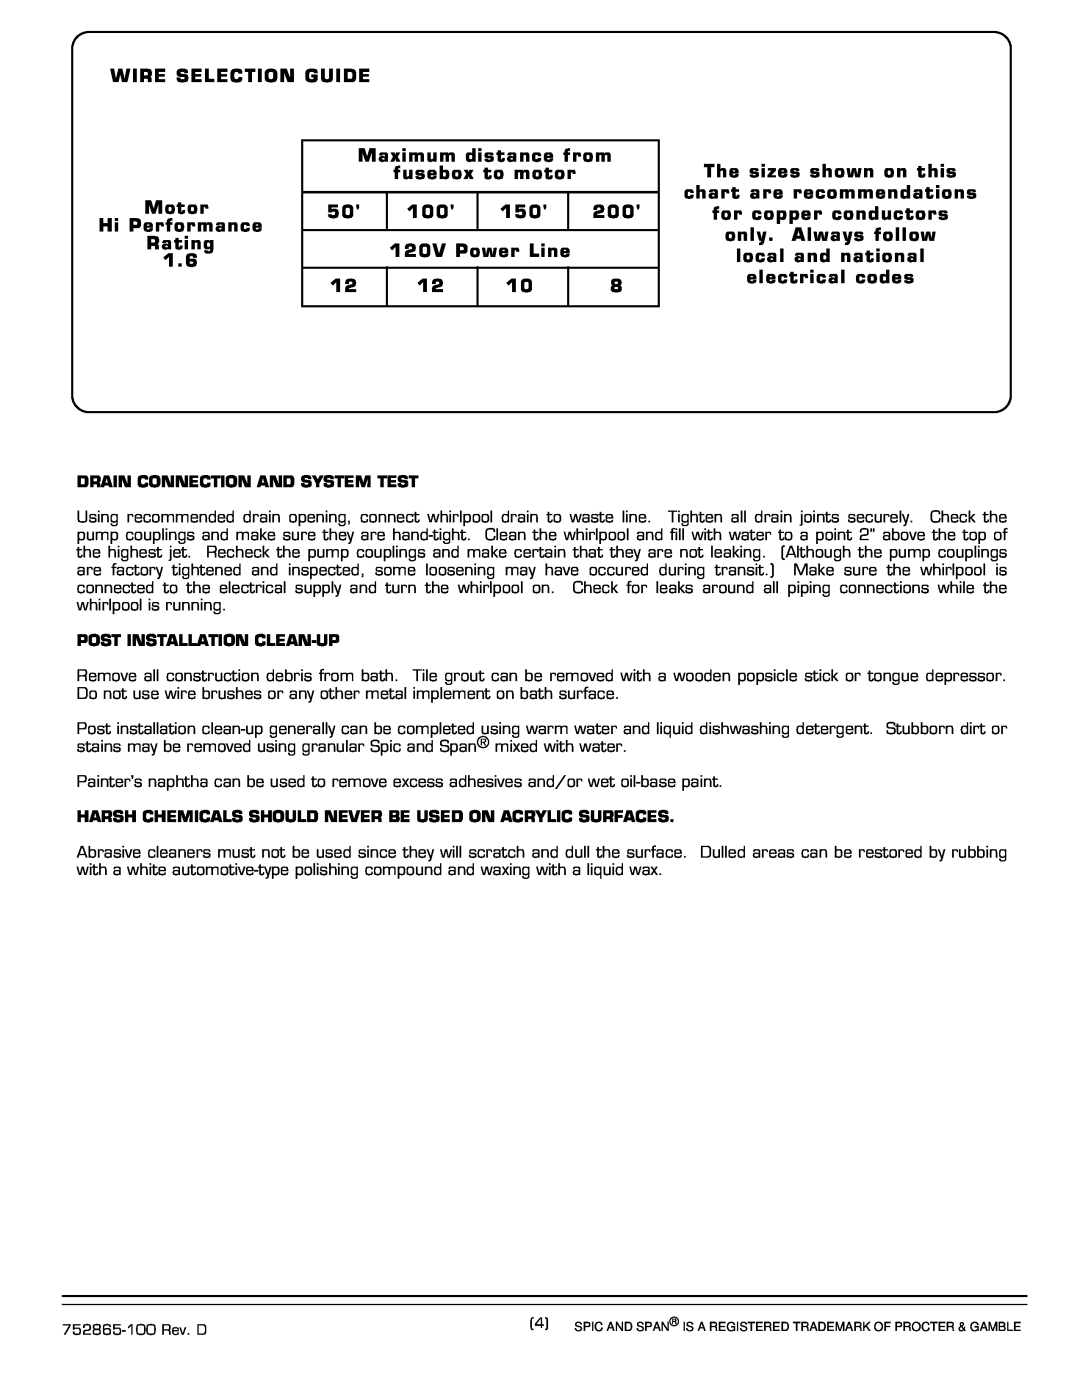 American Standard 2805E SERIES installation instructions Wire Selection Guide 